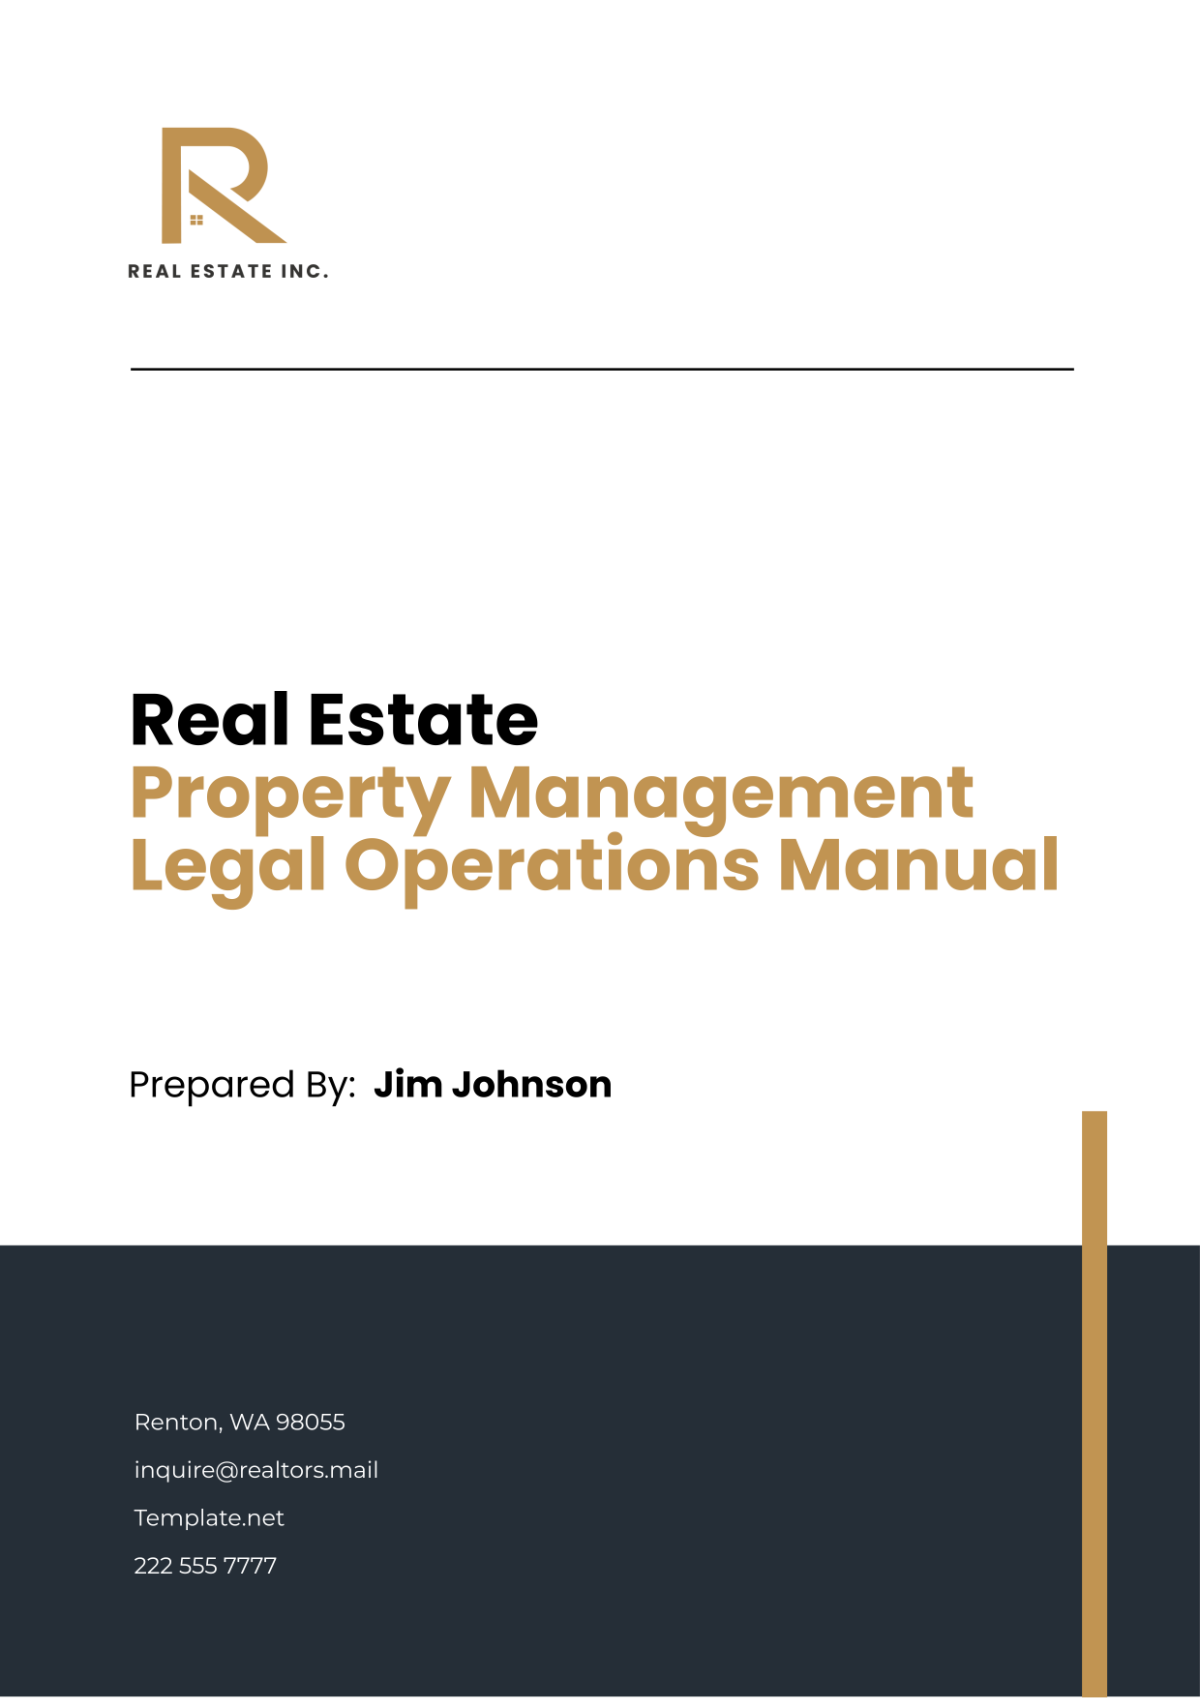 Real Estate Property Management Legal Operations Manual Template